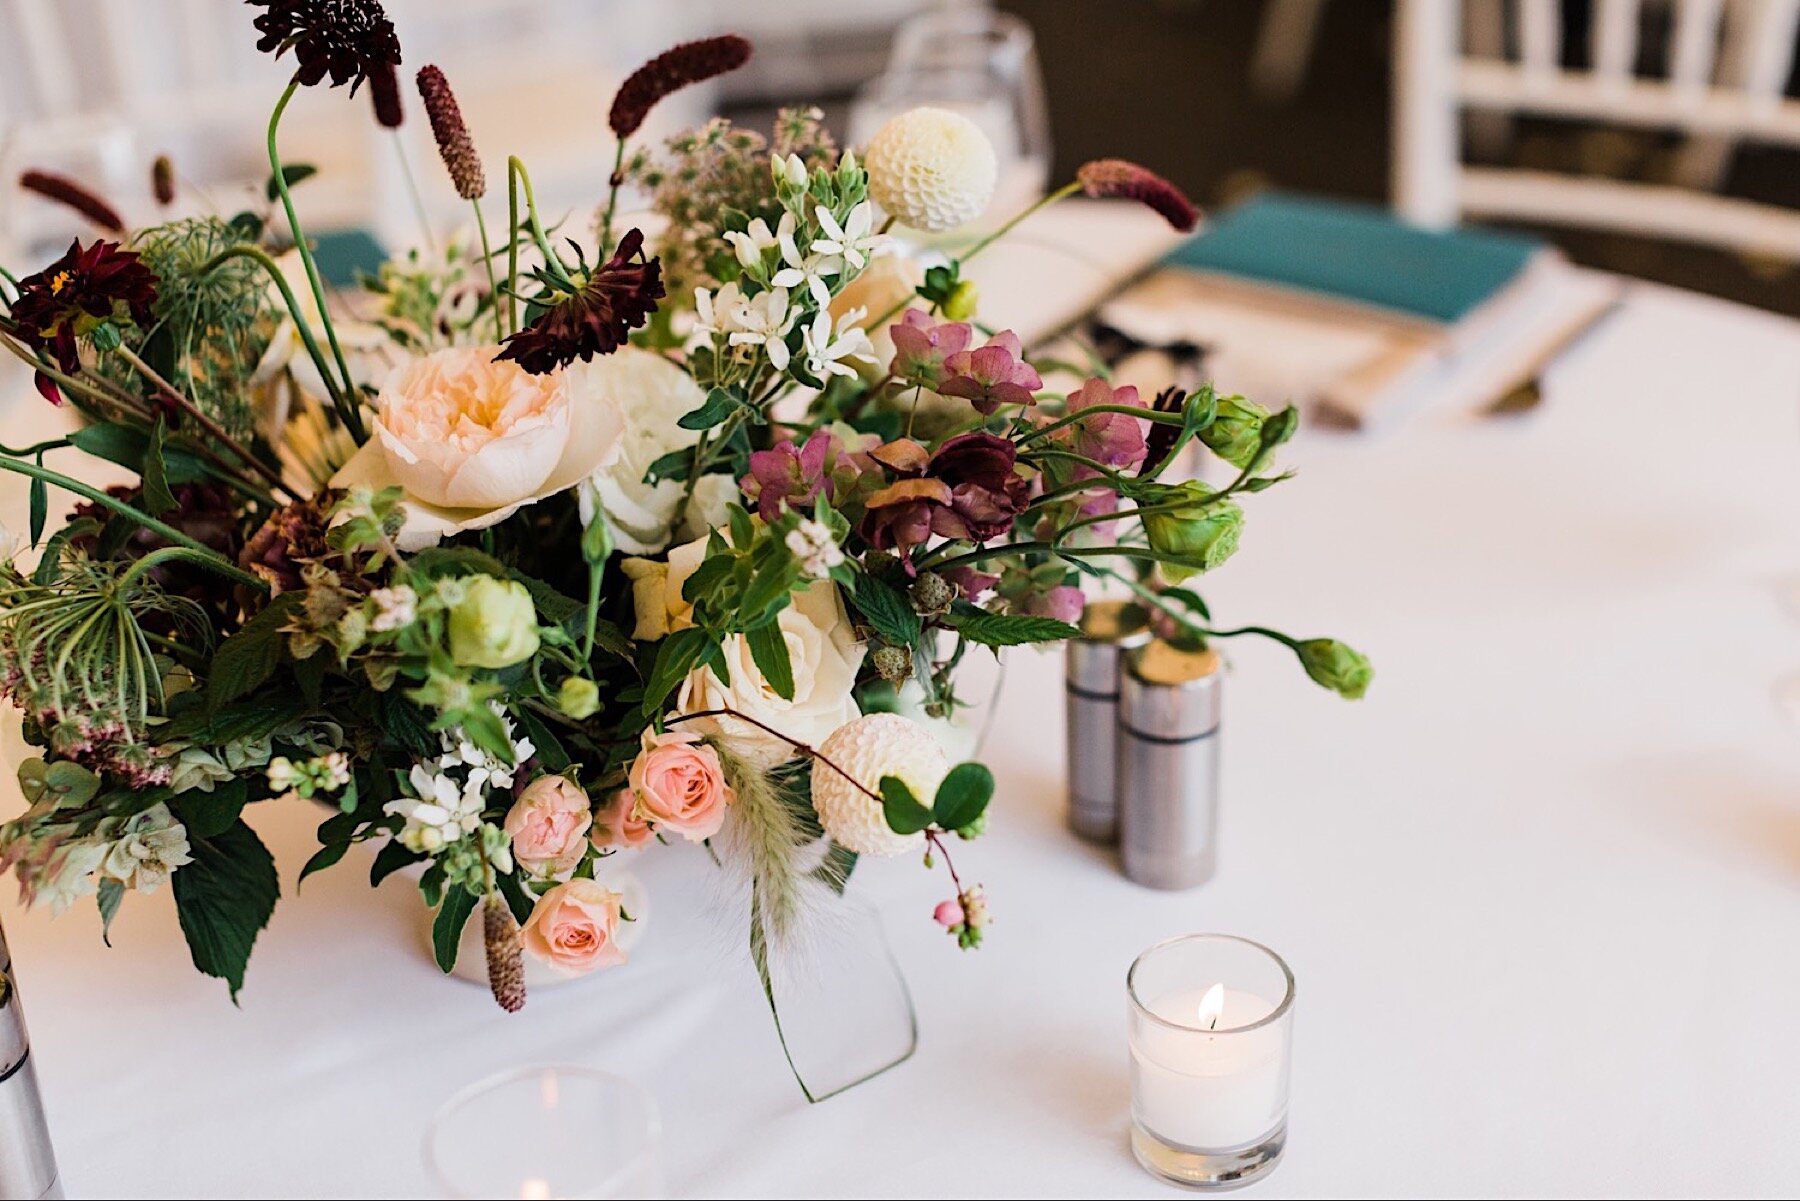 22_shaxton-ngo-432_A_Woodmark_floral_top_with_Florist_Gather_Design_from_Company_at_romantic_the_wedding_lush_Seattle_Wedding_design_Hotel.jpg